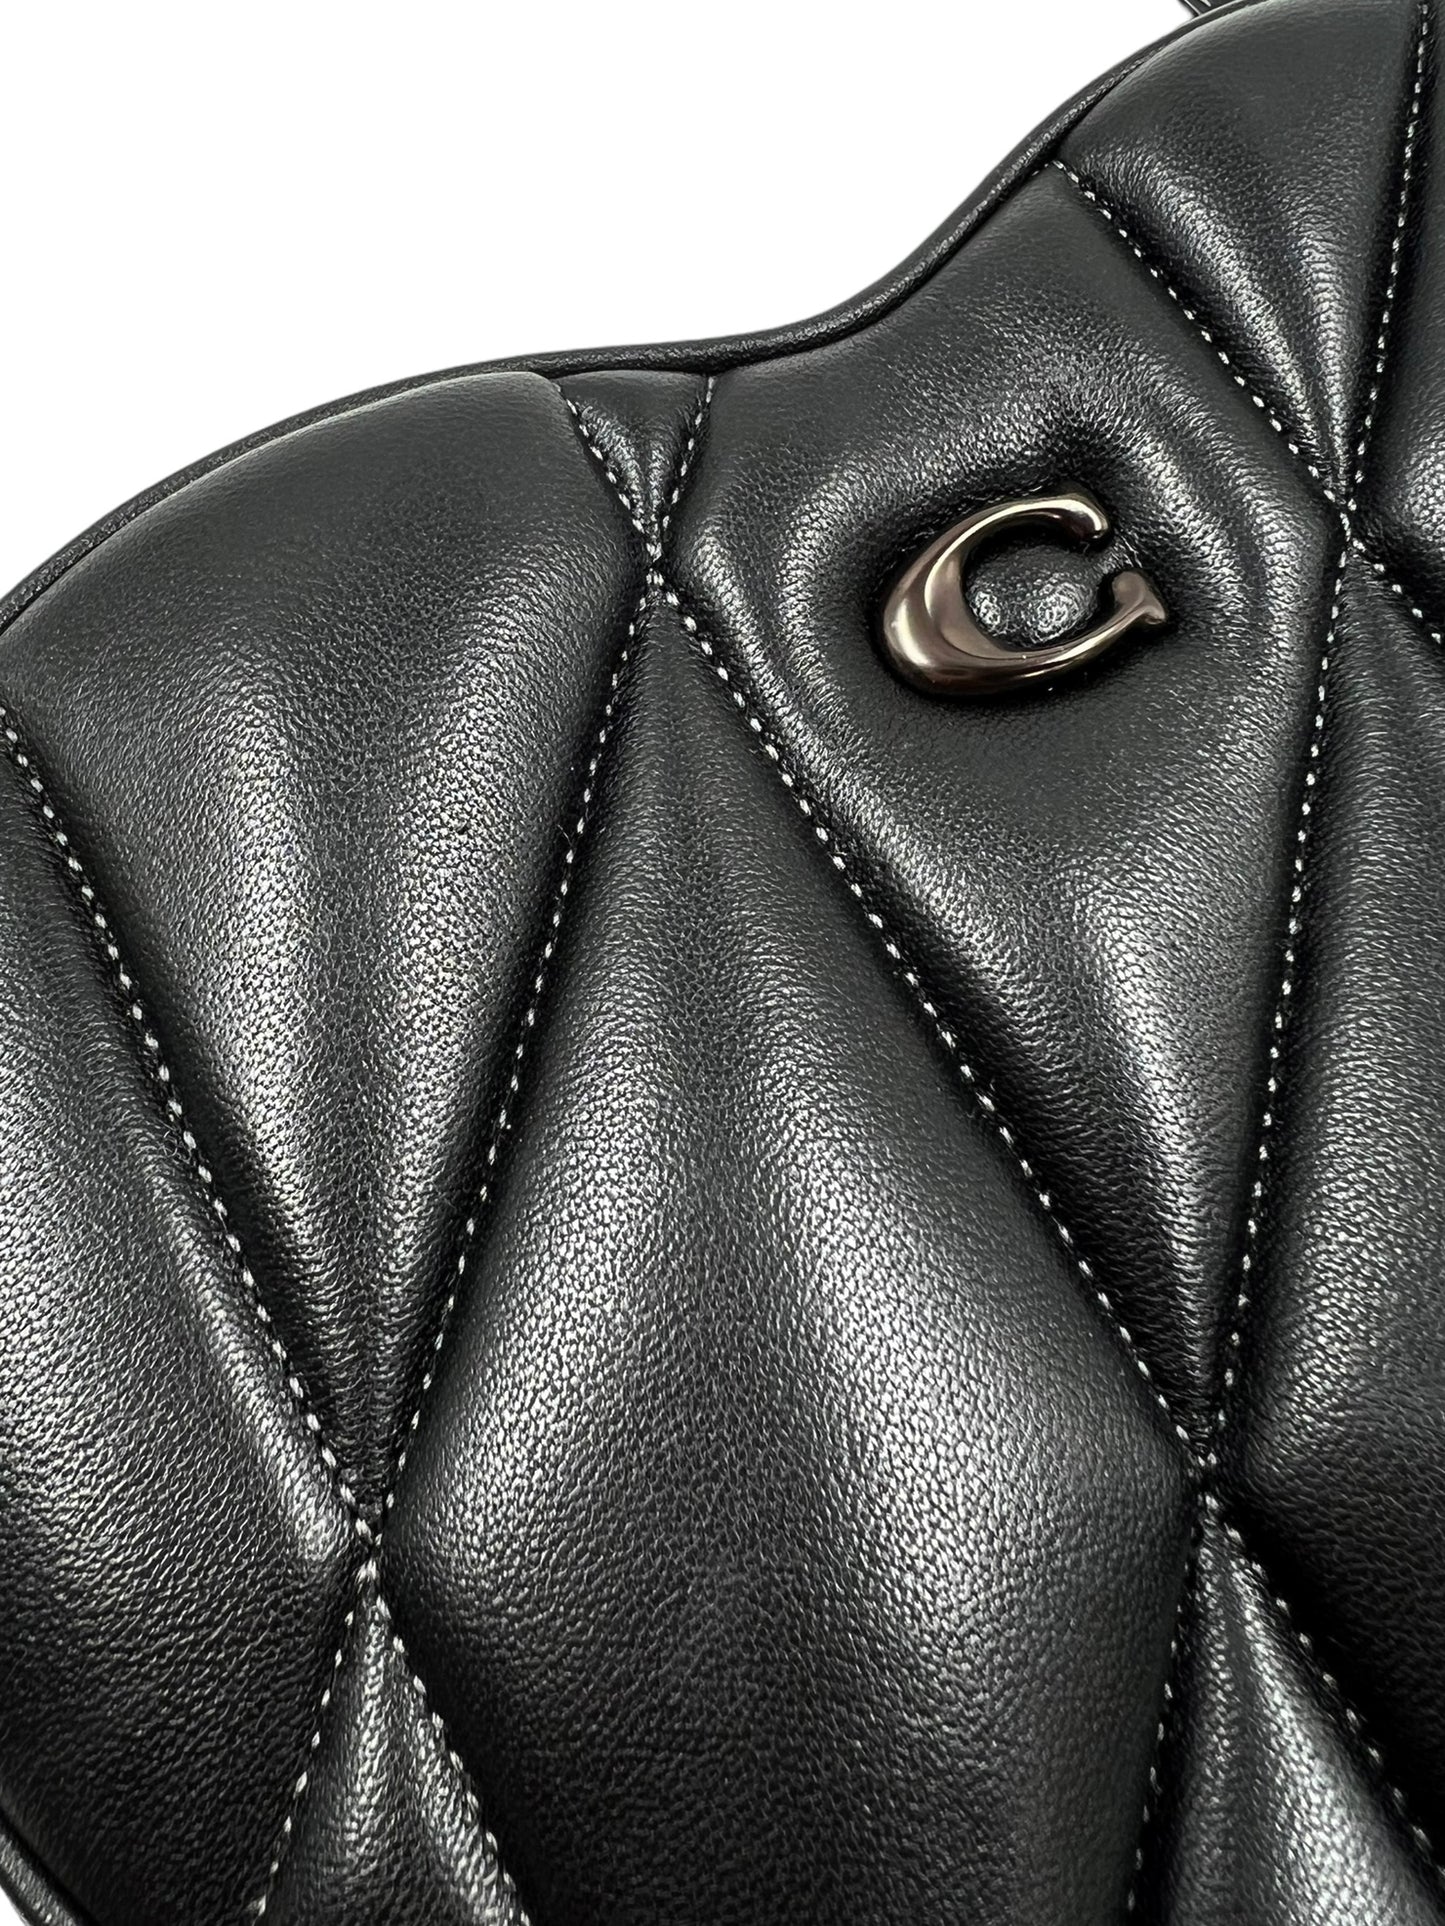 Coach Black Leather Quilted Heart Crossbody